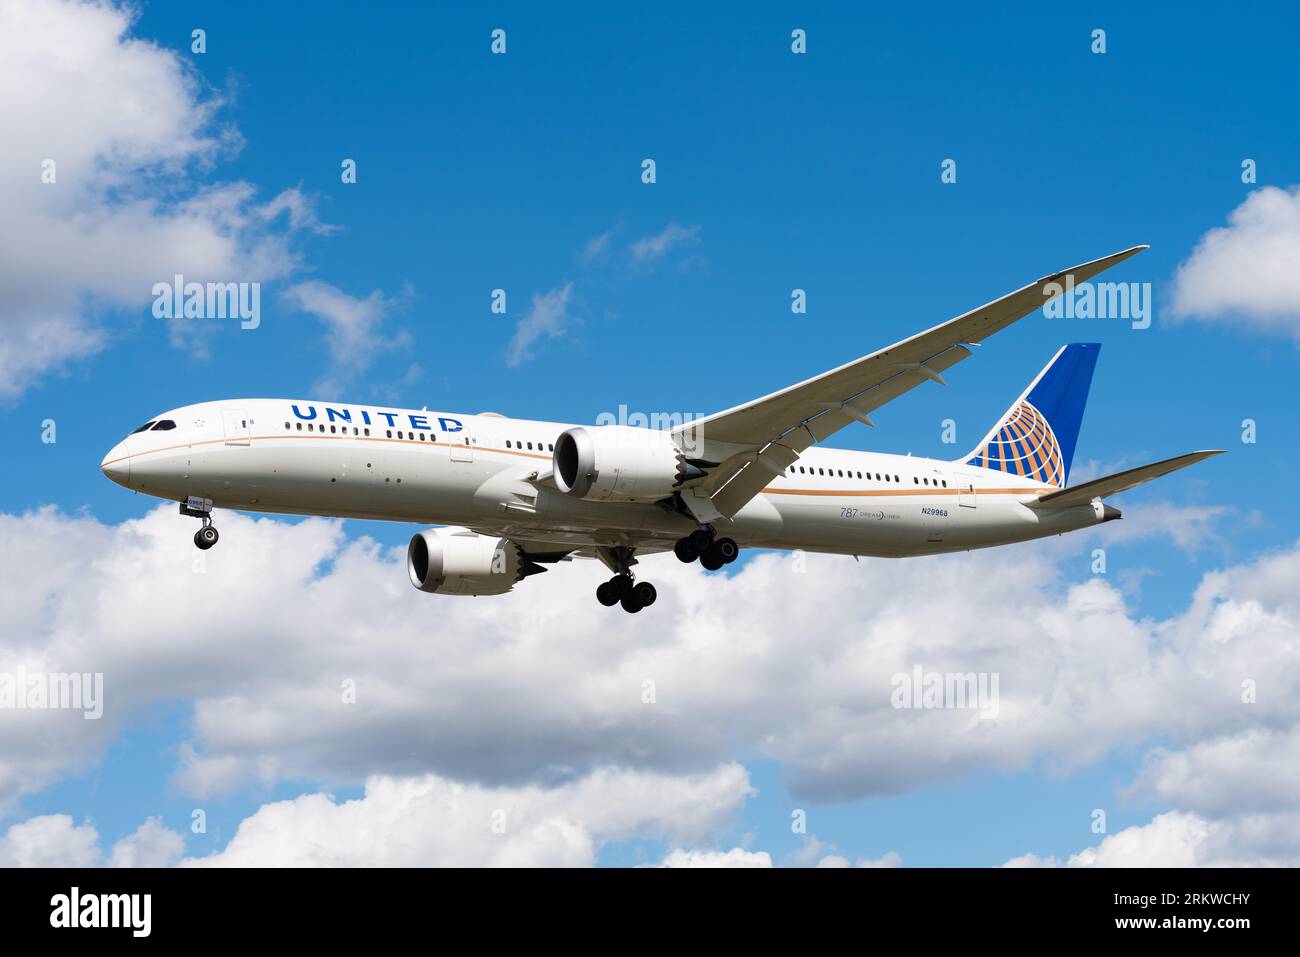 United Airlines Boeing 787-9 Dreamliner jet airliner plane N29968 on finals to land at London Heathrow Airport, UK. Long haul wide body airplane Stock Photo